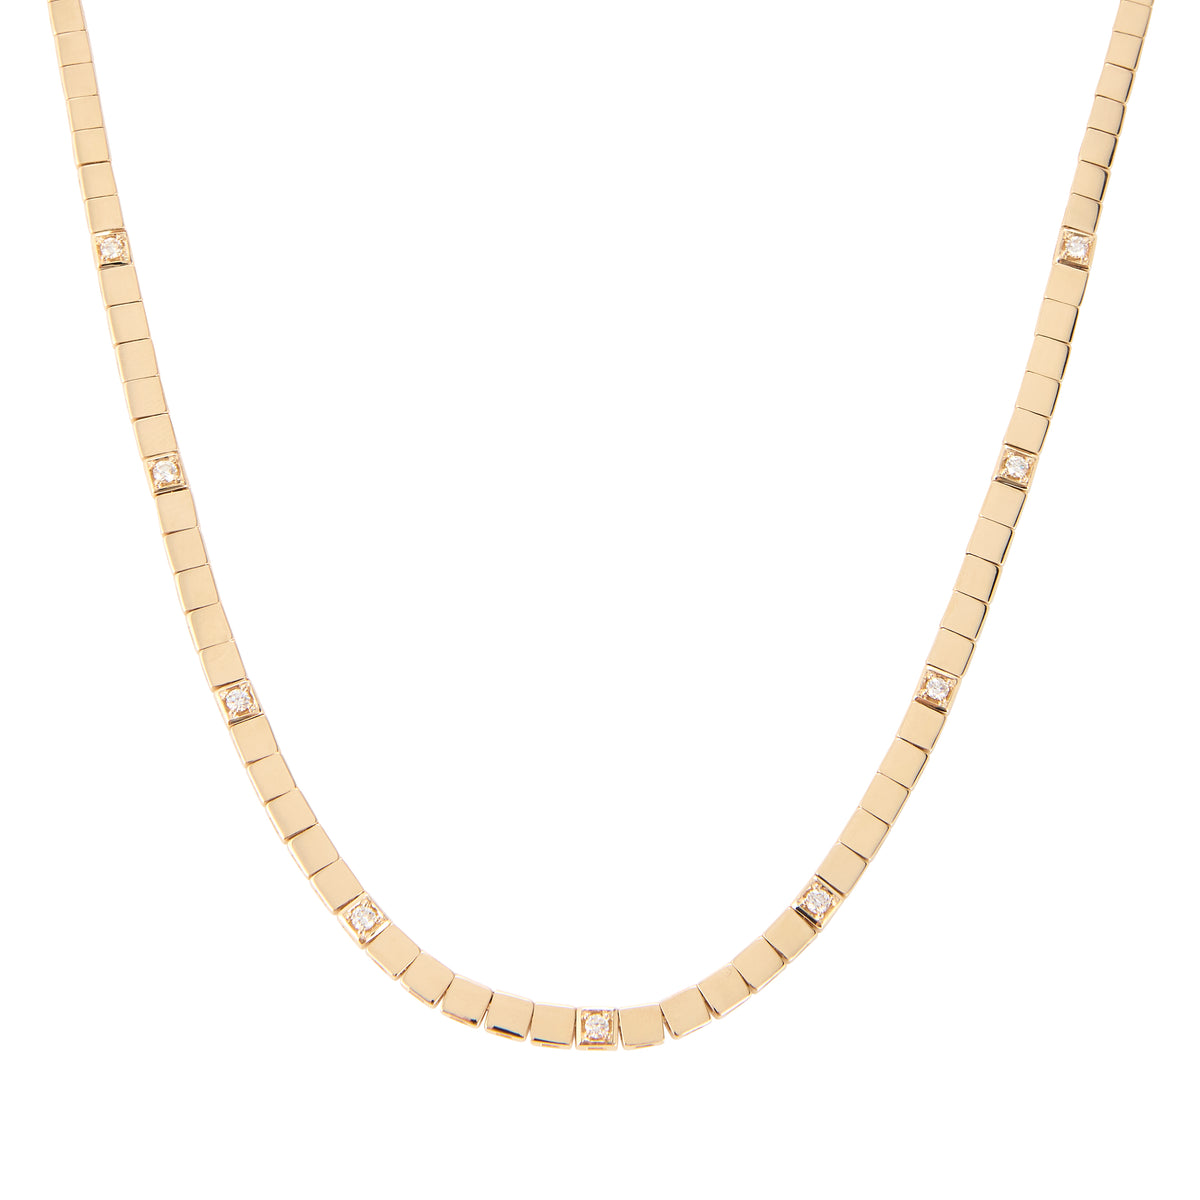 Petite Domino Snake Chain Necklace